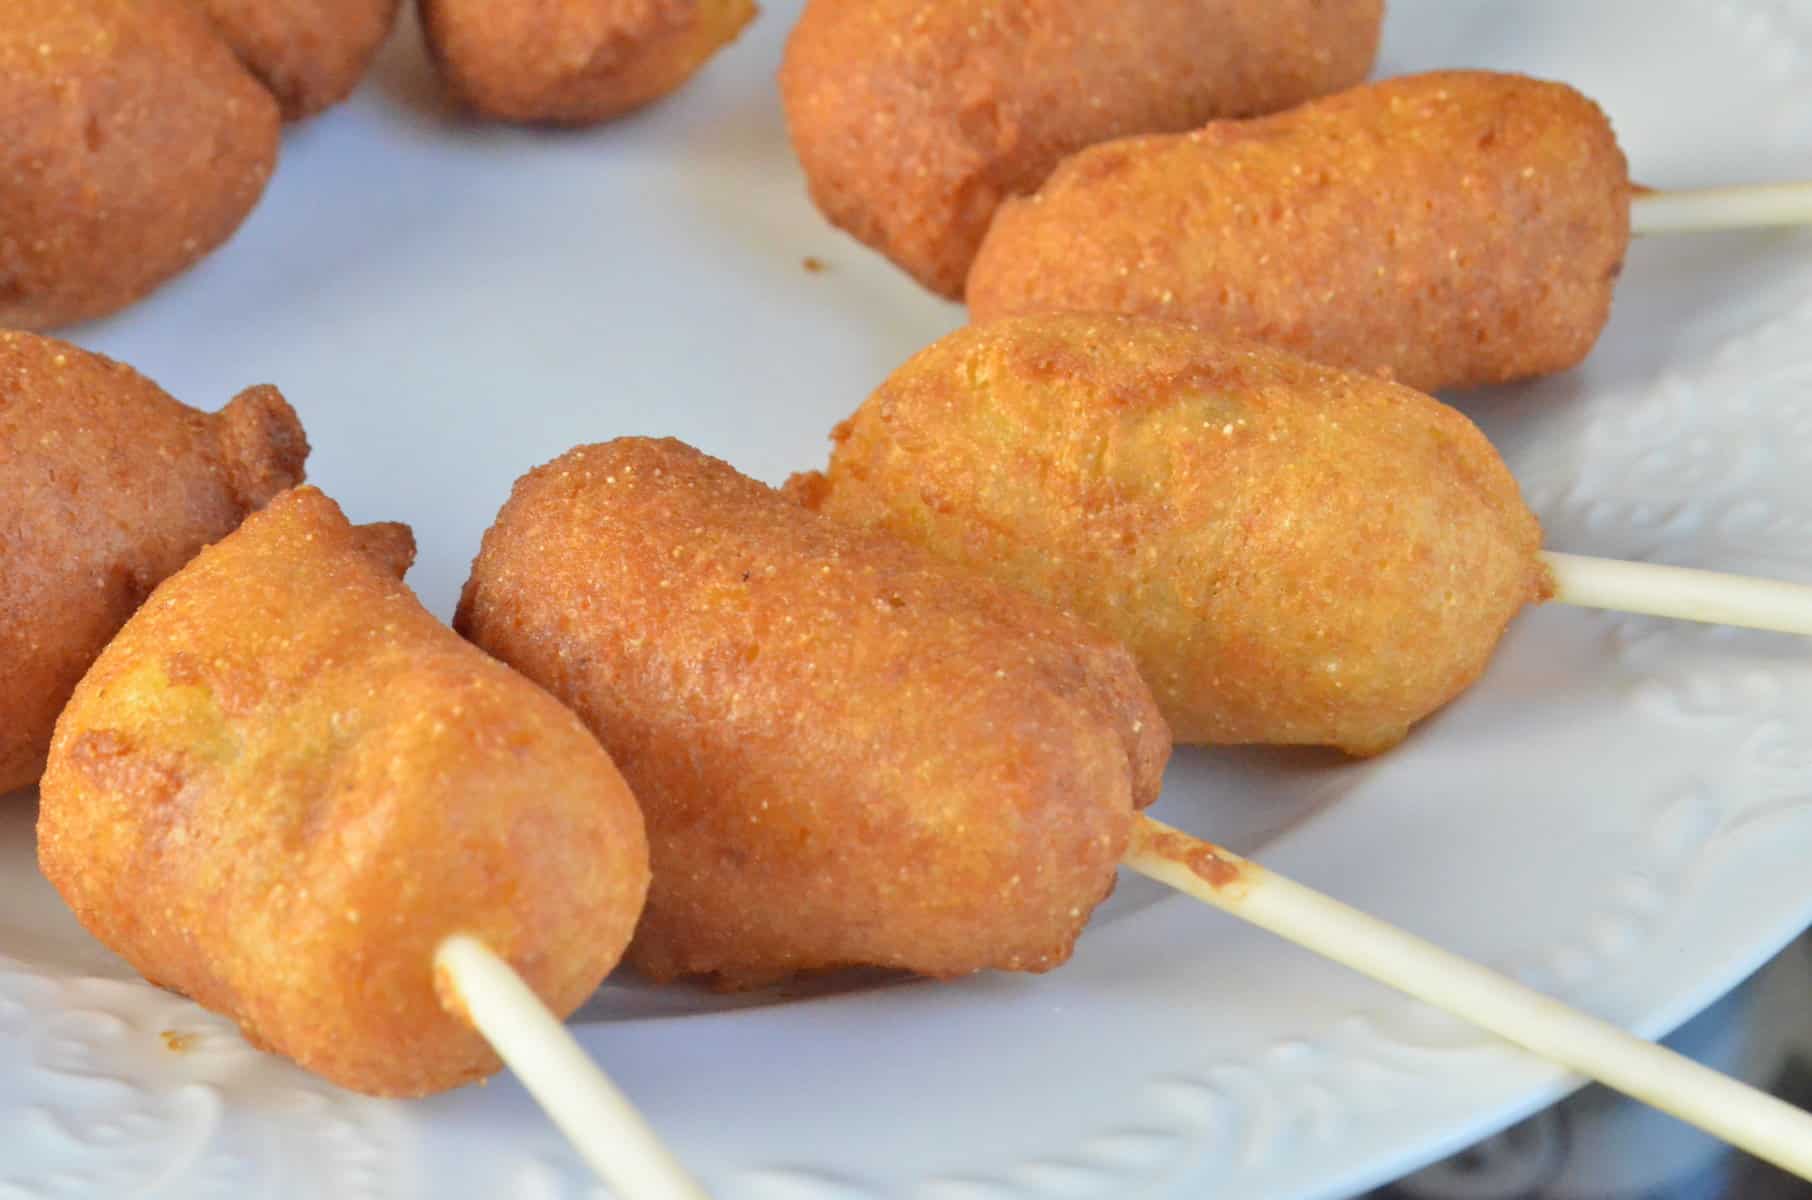 Freshly fried corndogs lay around a plate